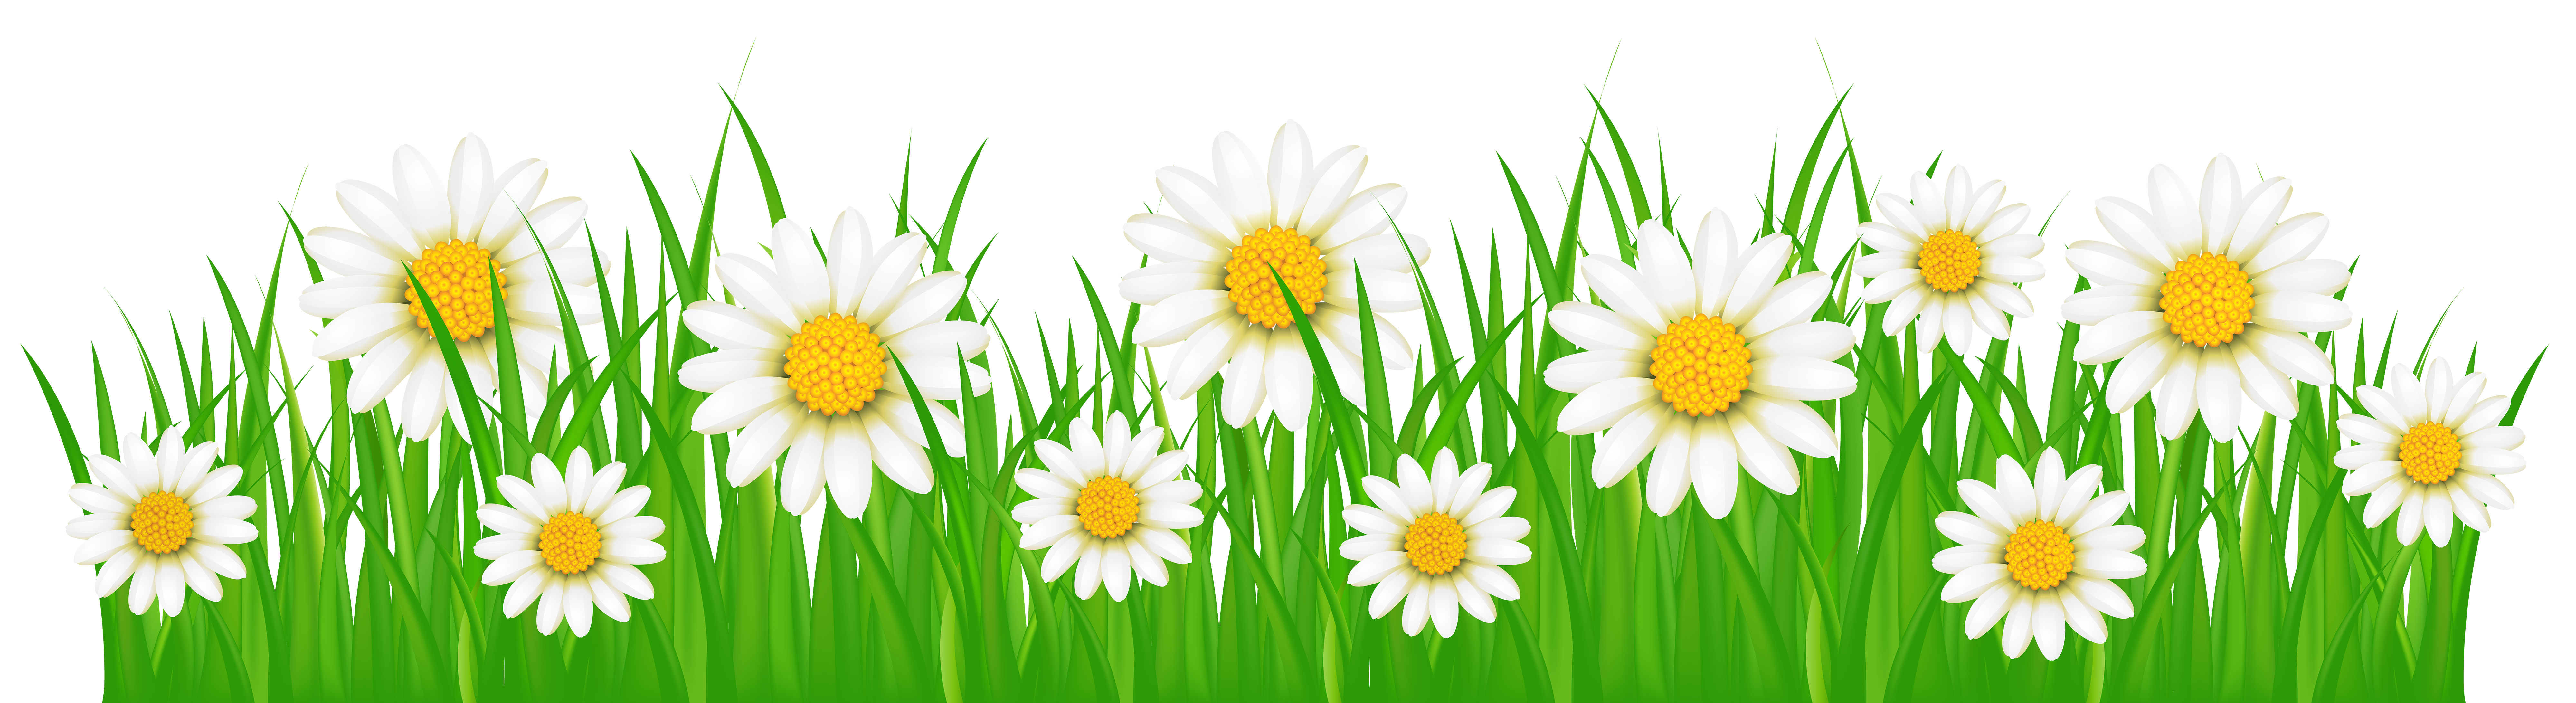 Grass Ground with White Flowers PNG Clip Art Image